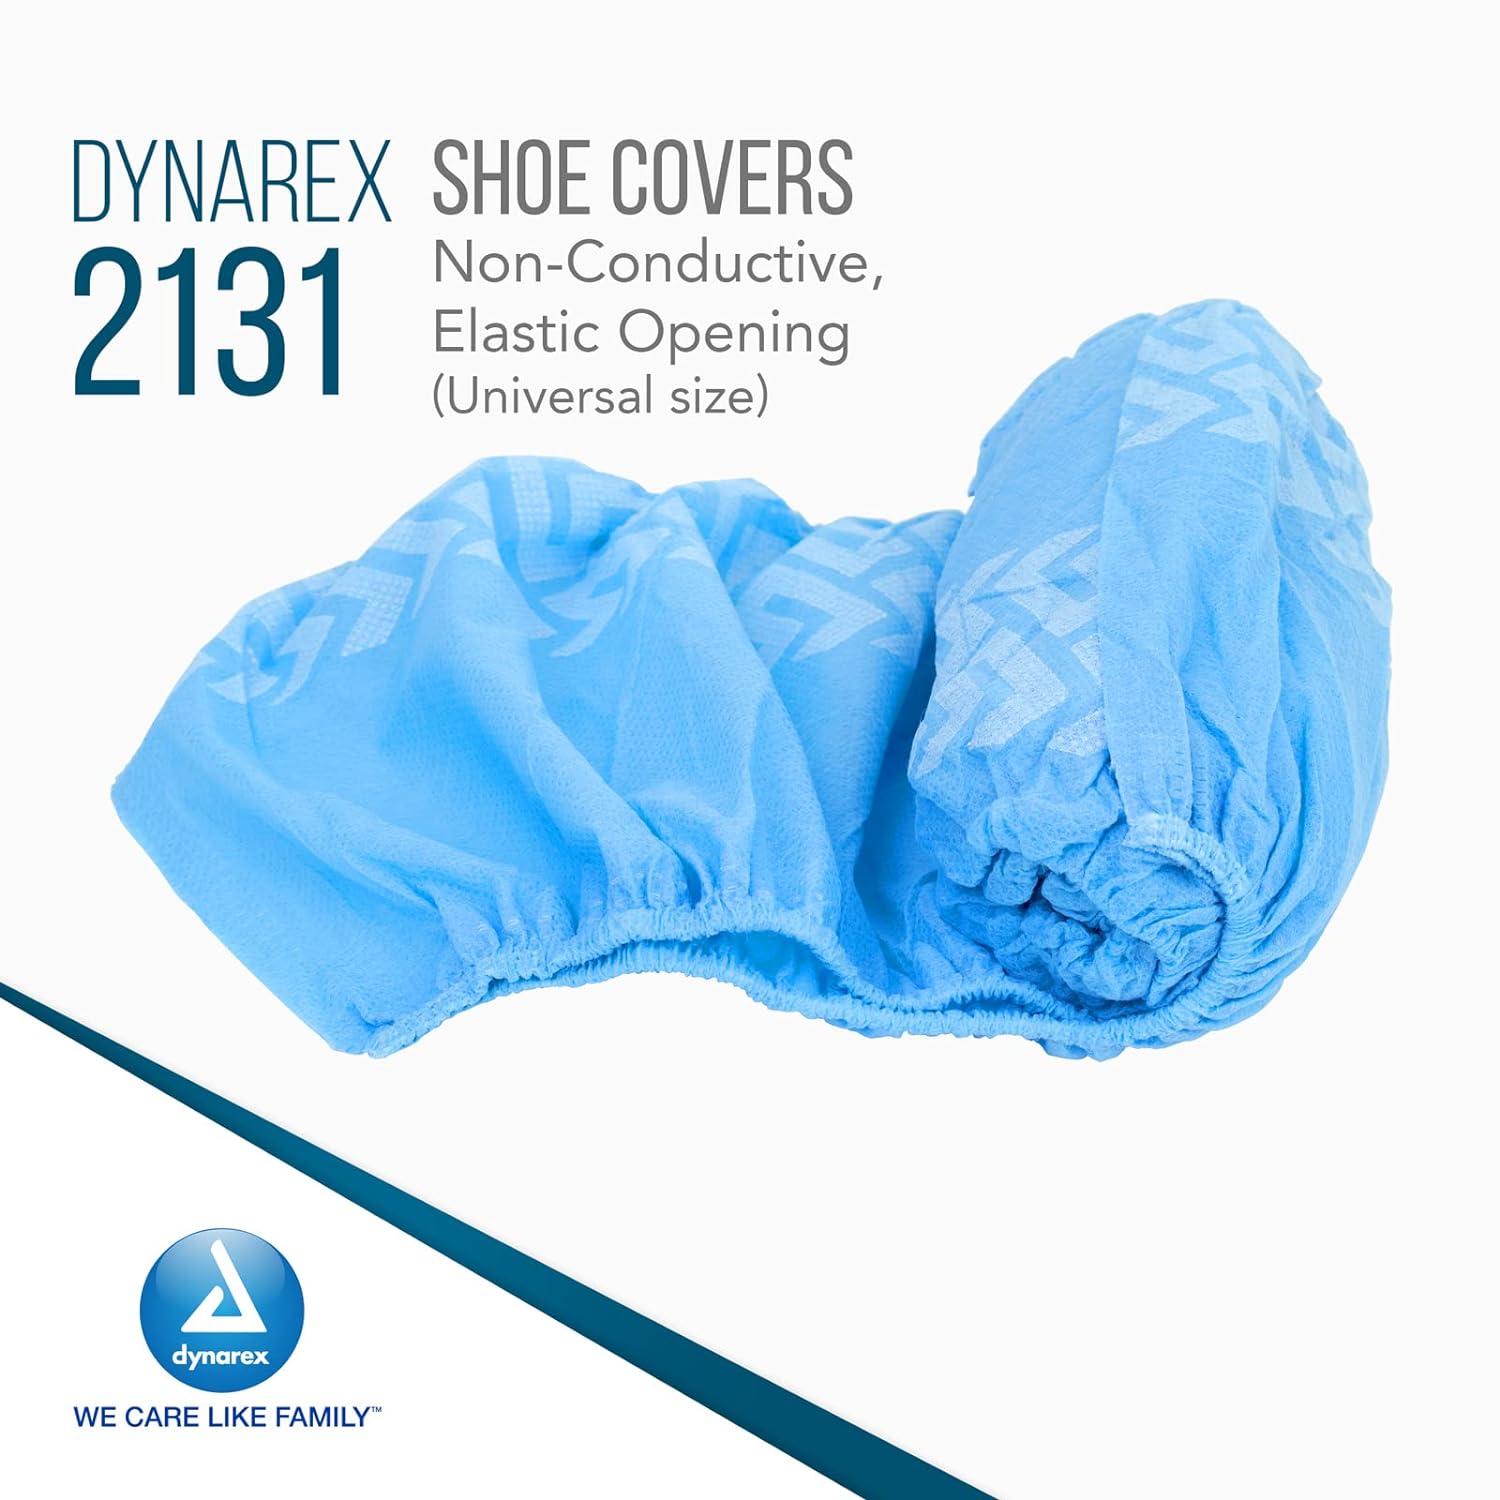 Dynarex Disposable Shoe Cover, Universal Size, Non-Conductive, have Sewn Seams with Elastic Opening and Fits Most Shoes, Blue, 1 Box of 150 pairs